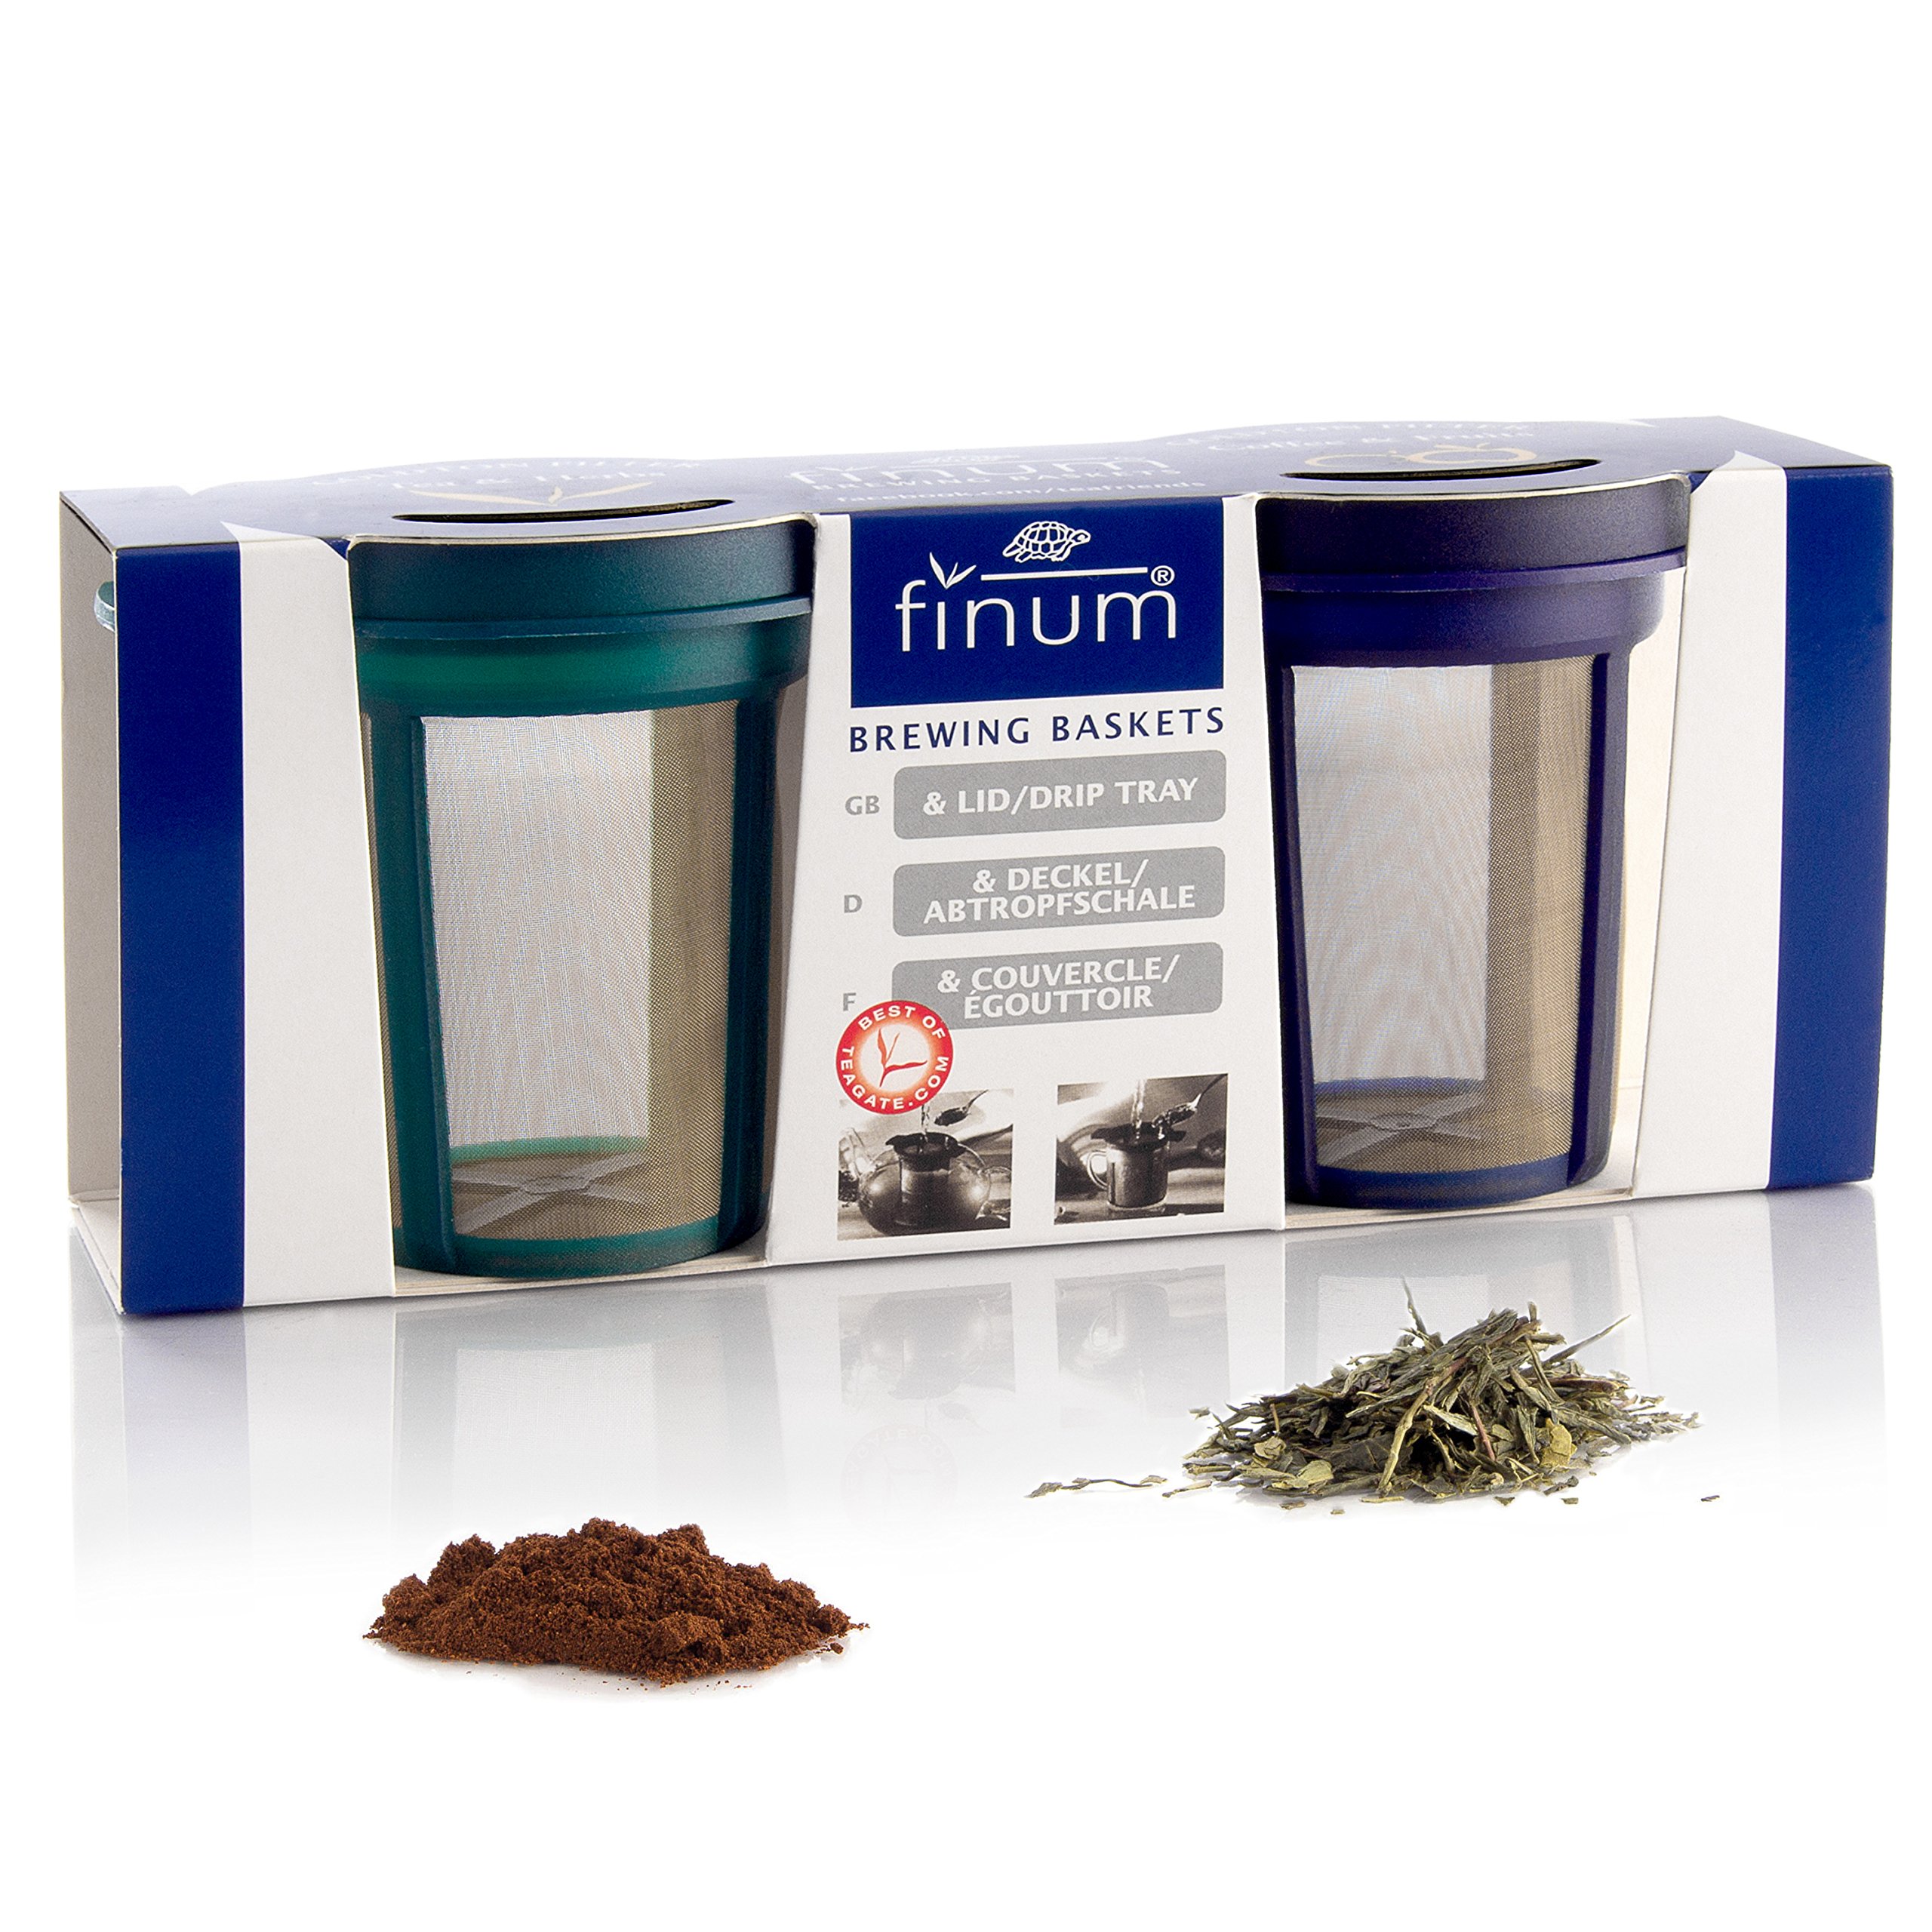 Finum Goldton Reusable Stainless Steel Coffee and Tea Infusing Mesh Brewing Basket and Filters, Set of 2 Medium Sized Filters, Blue and Green